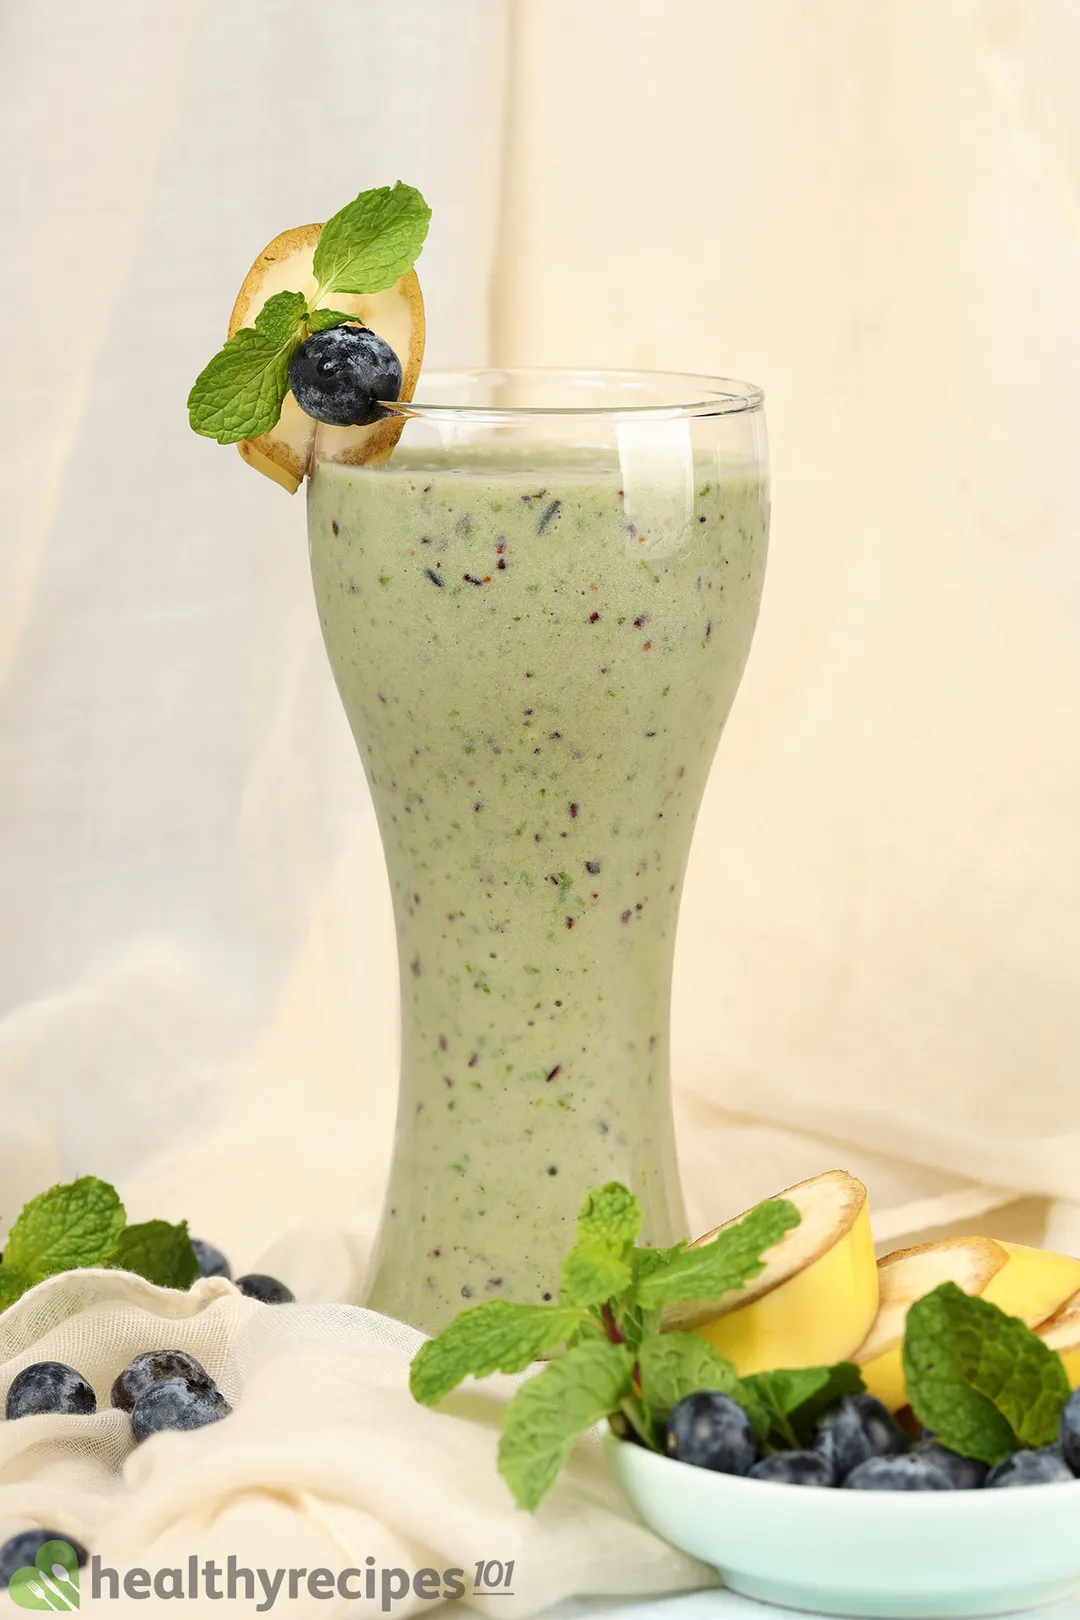 a glass of blueberry kale smoothie, decorated with blueberries, banana slices, mint leaves